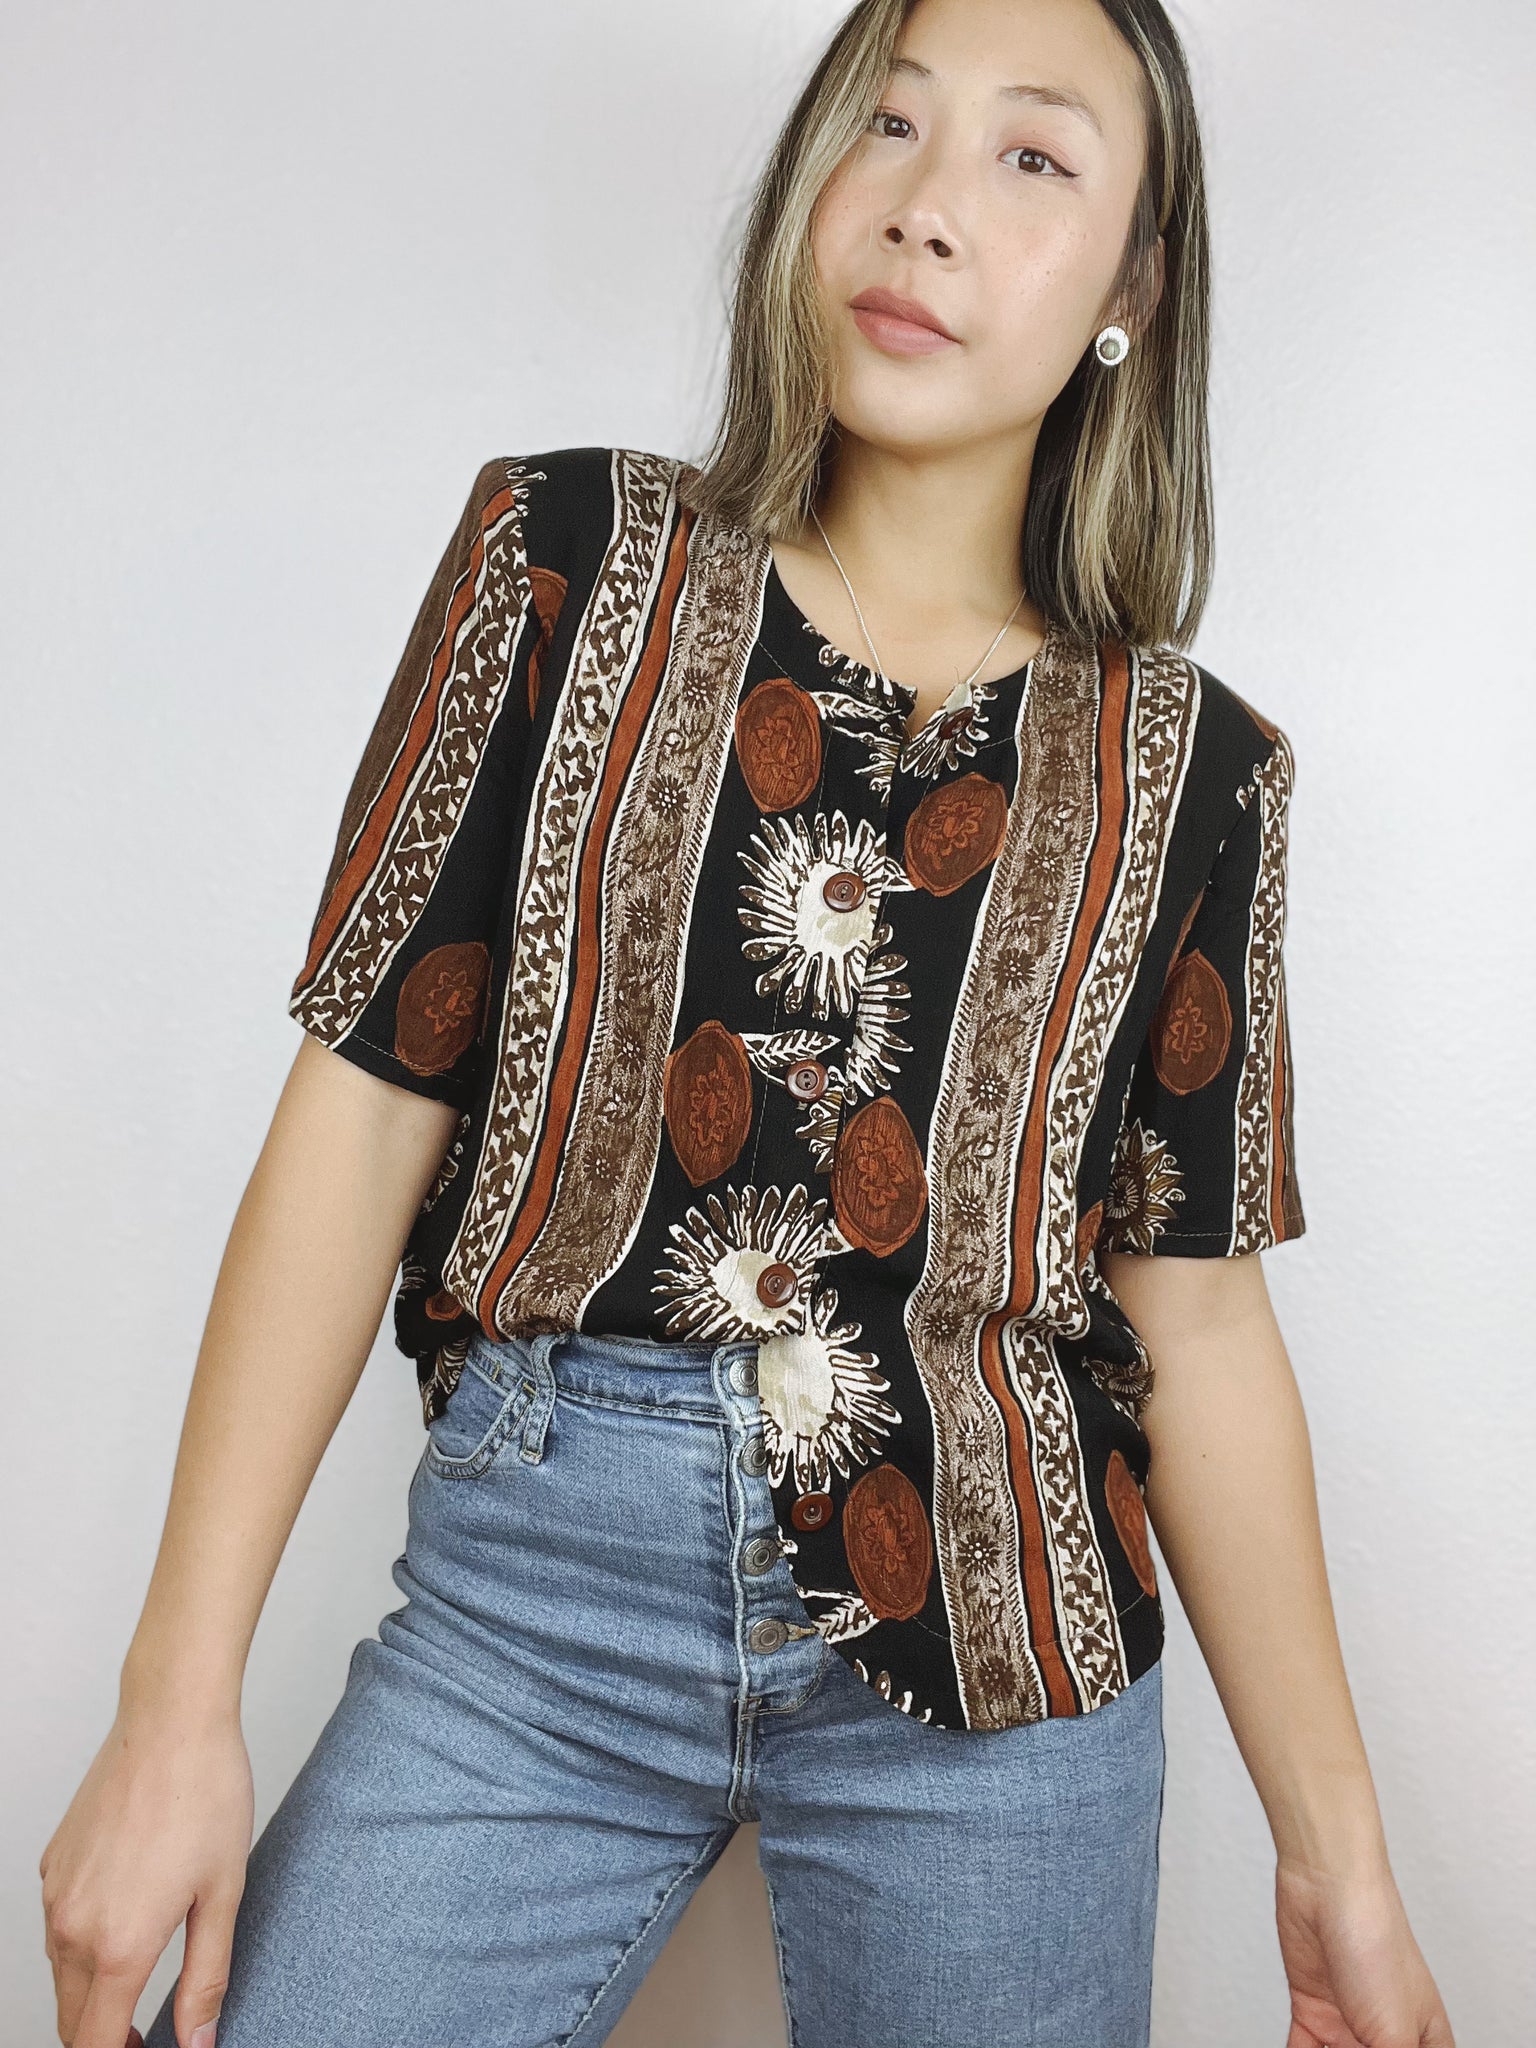 SALE Fritzi Patterned Button up Top